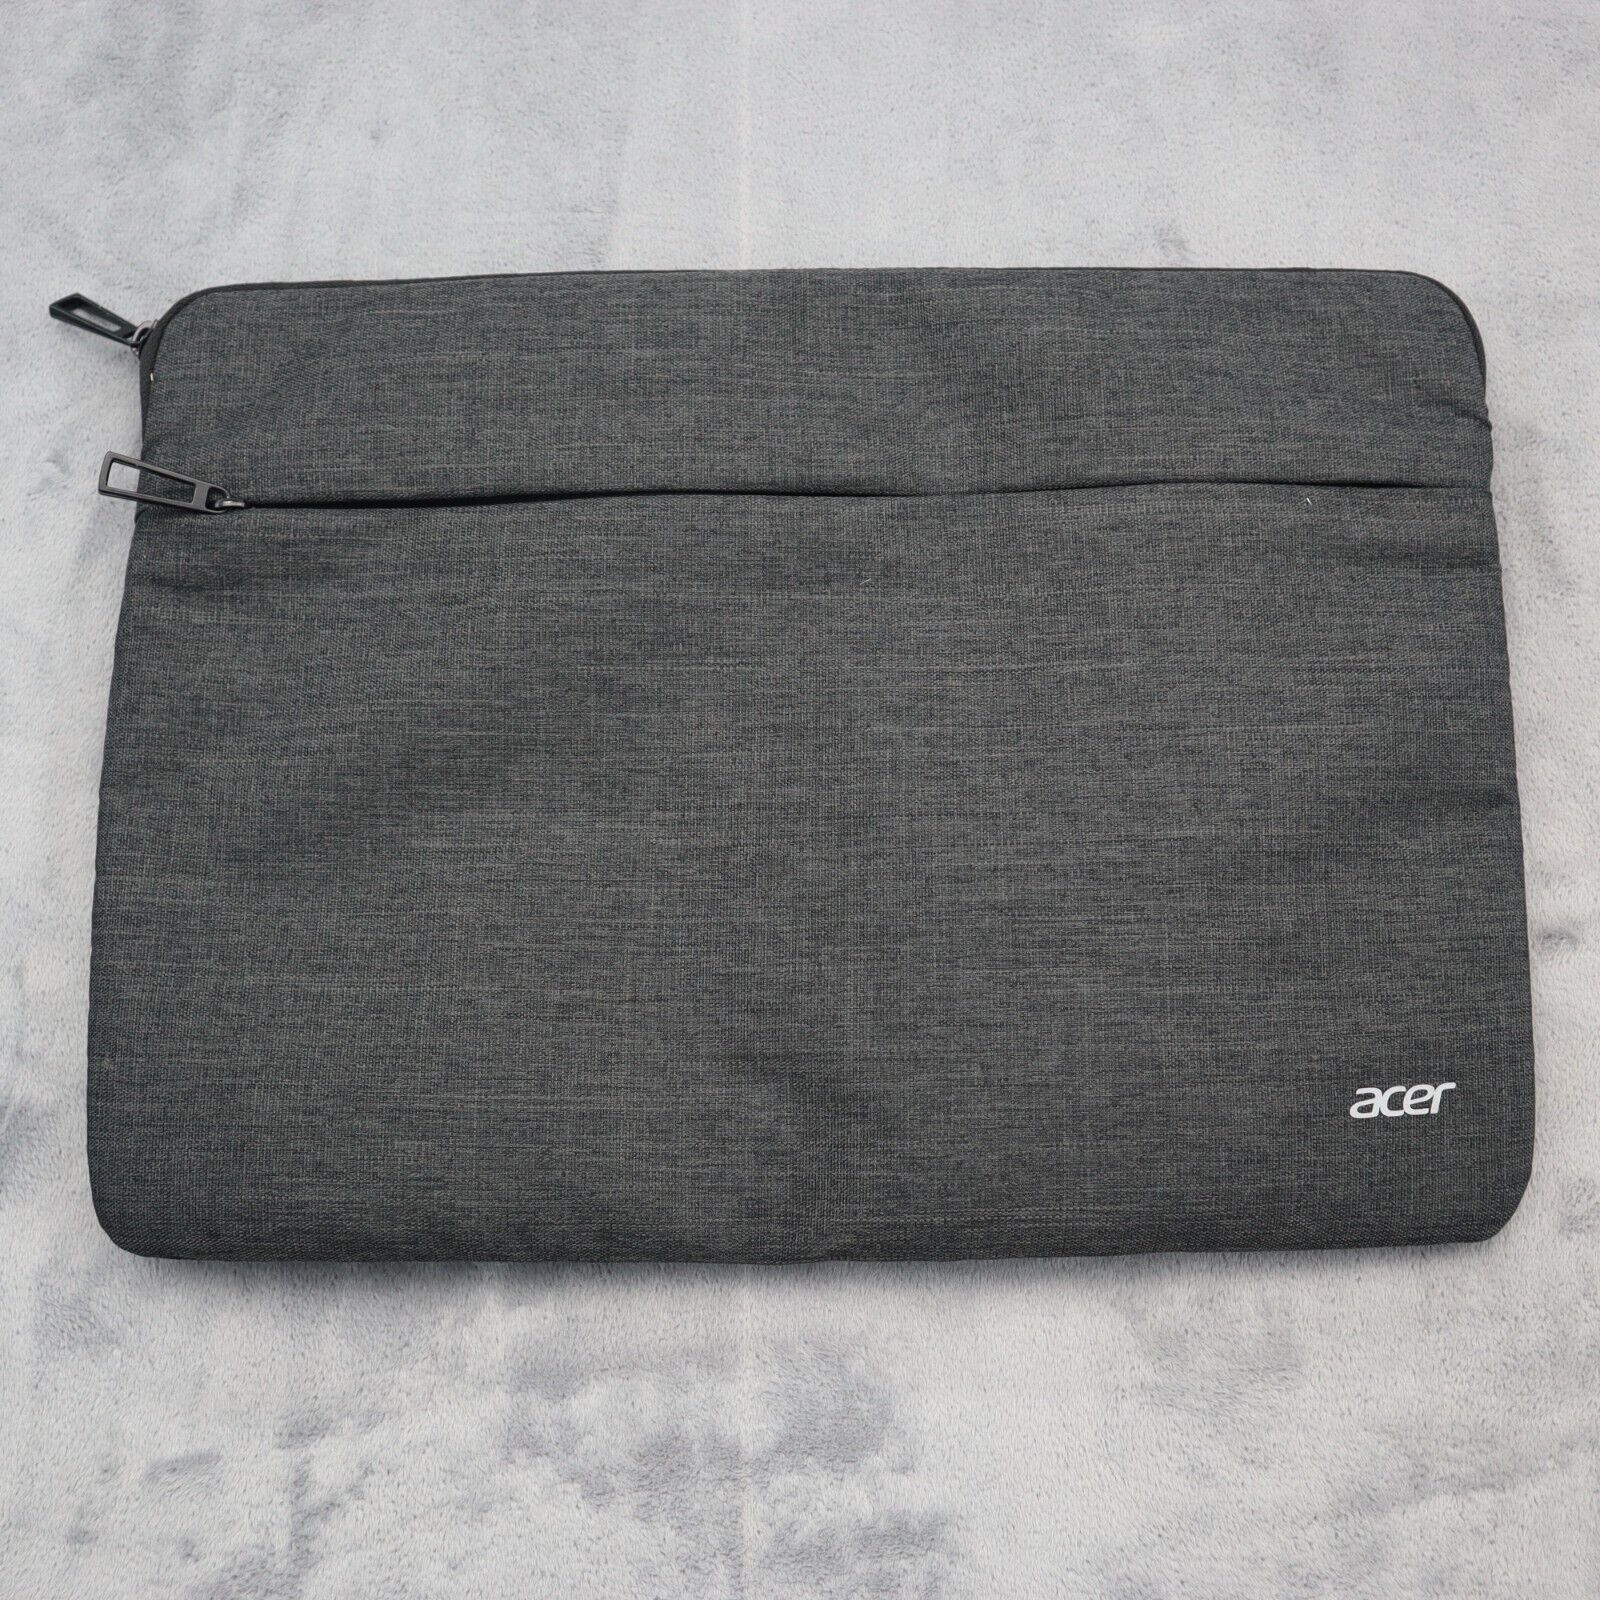 Acer Laptop Electronic Tablet Gray Heathered Sleeve Pocket Zip Closure 16x11.5 - $22.75